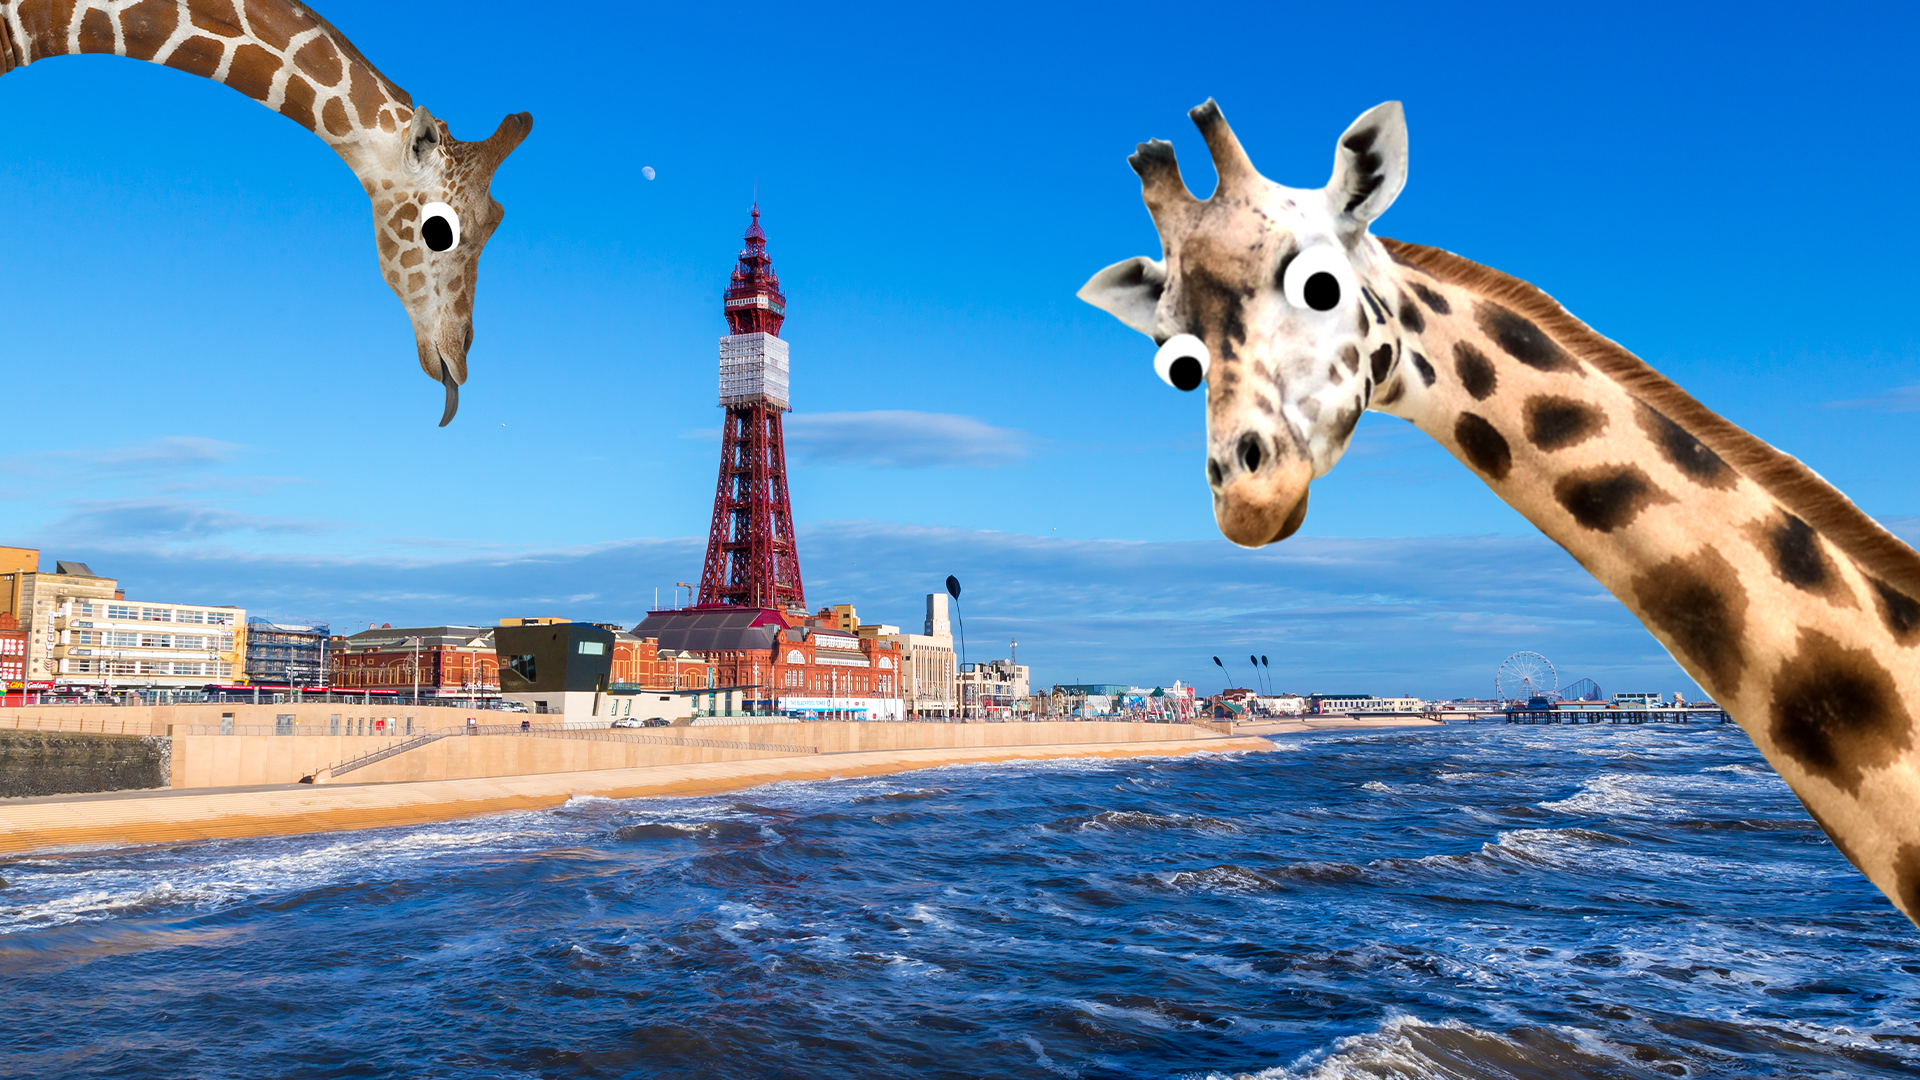 Exotic Blackpool with giraffes